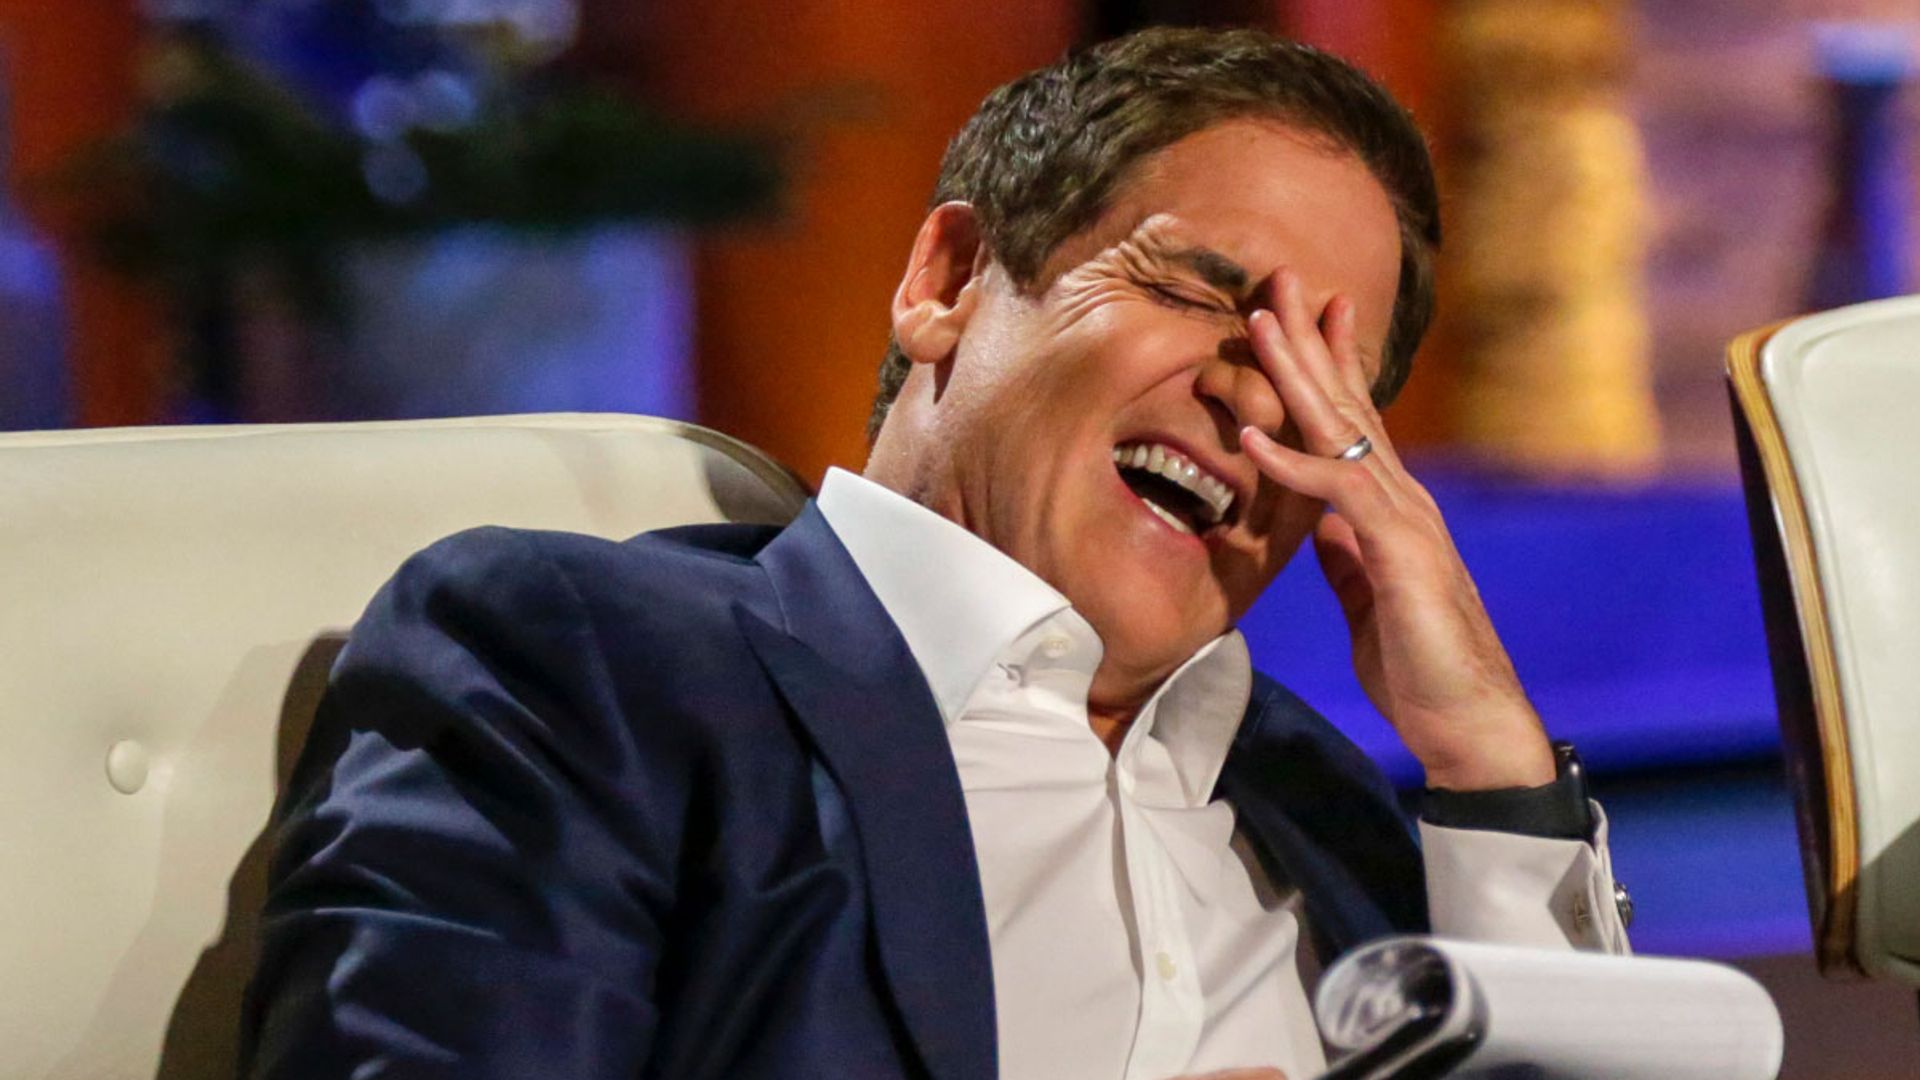 Shark Tank: 7 biggest missed investments that went on to make